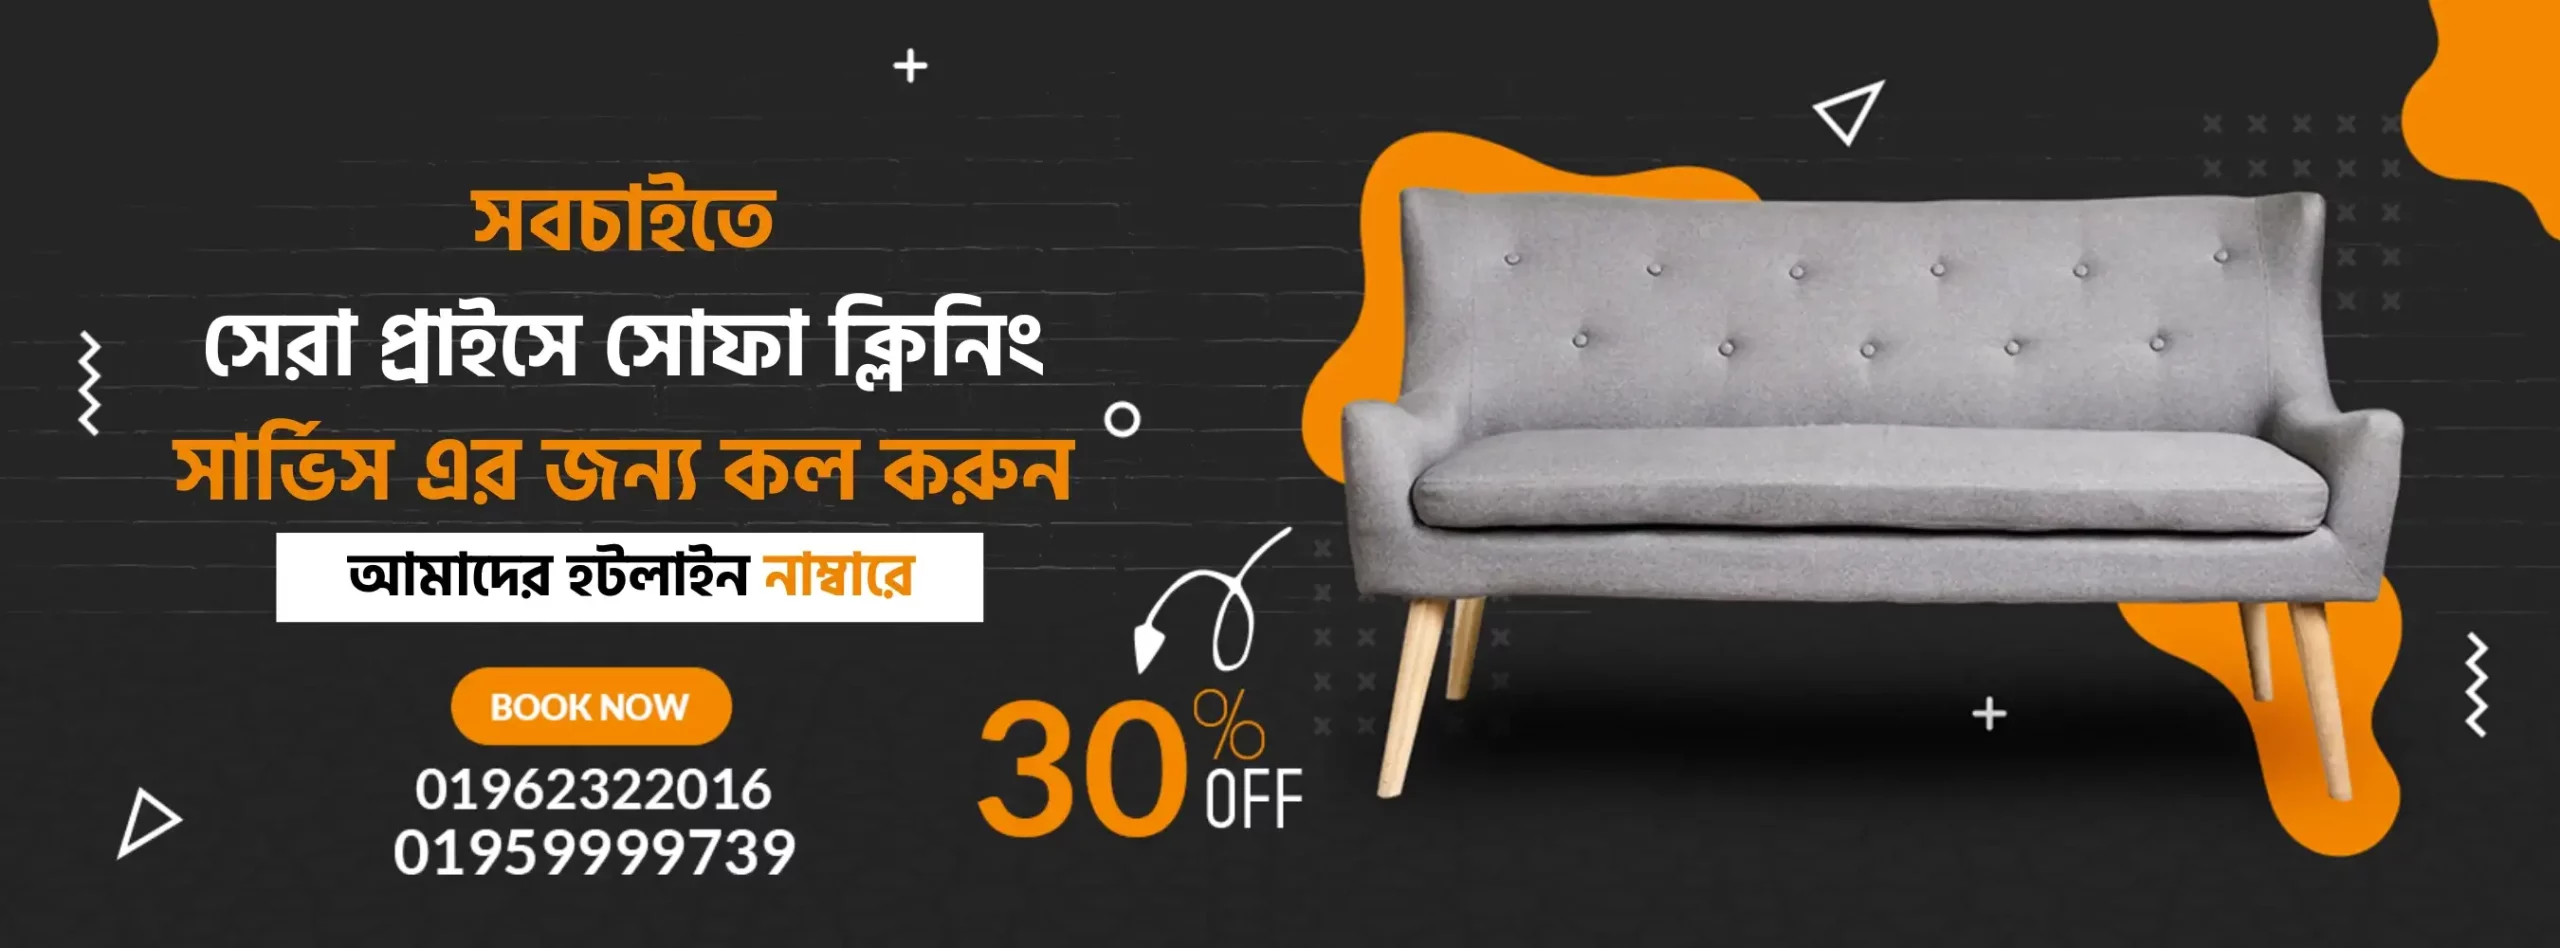 Astha sofa cleaning service